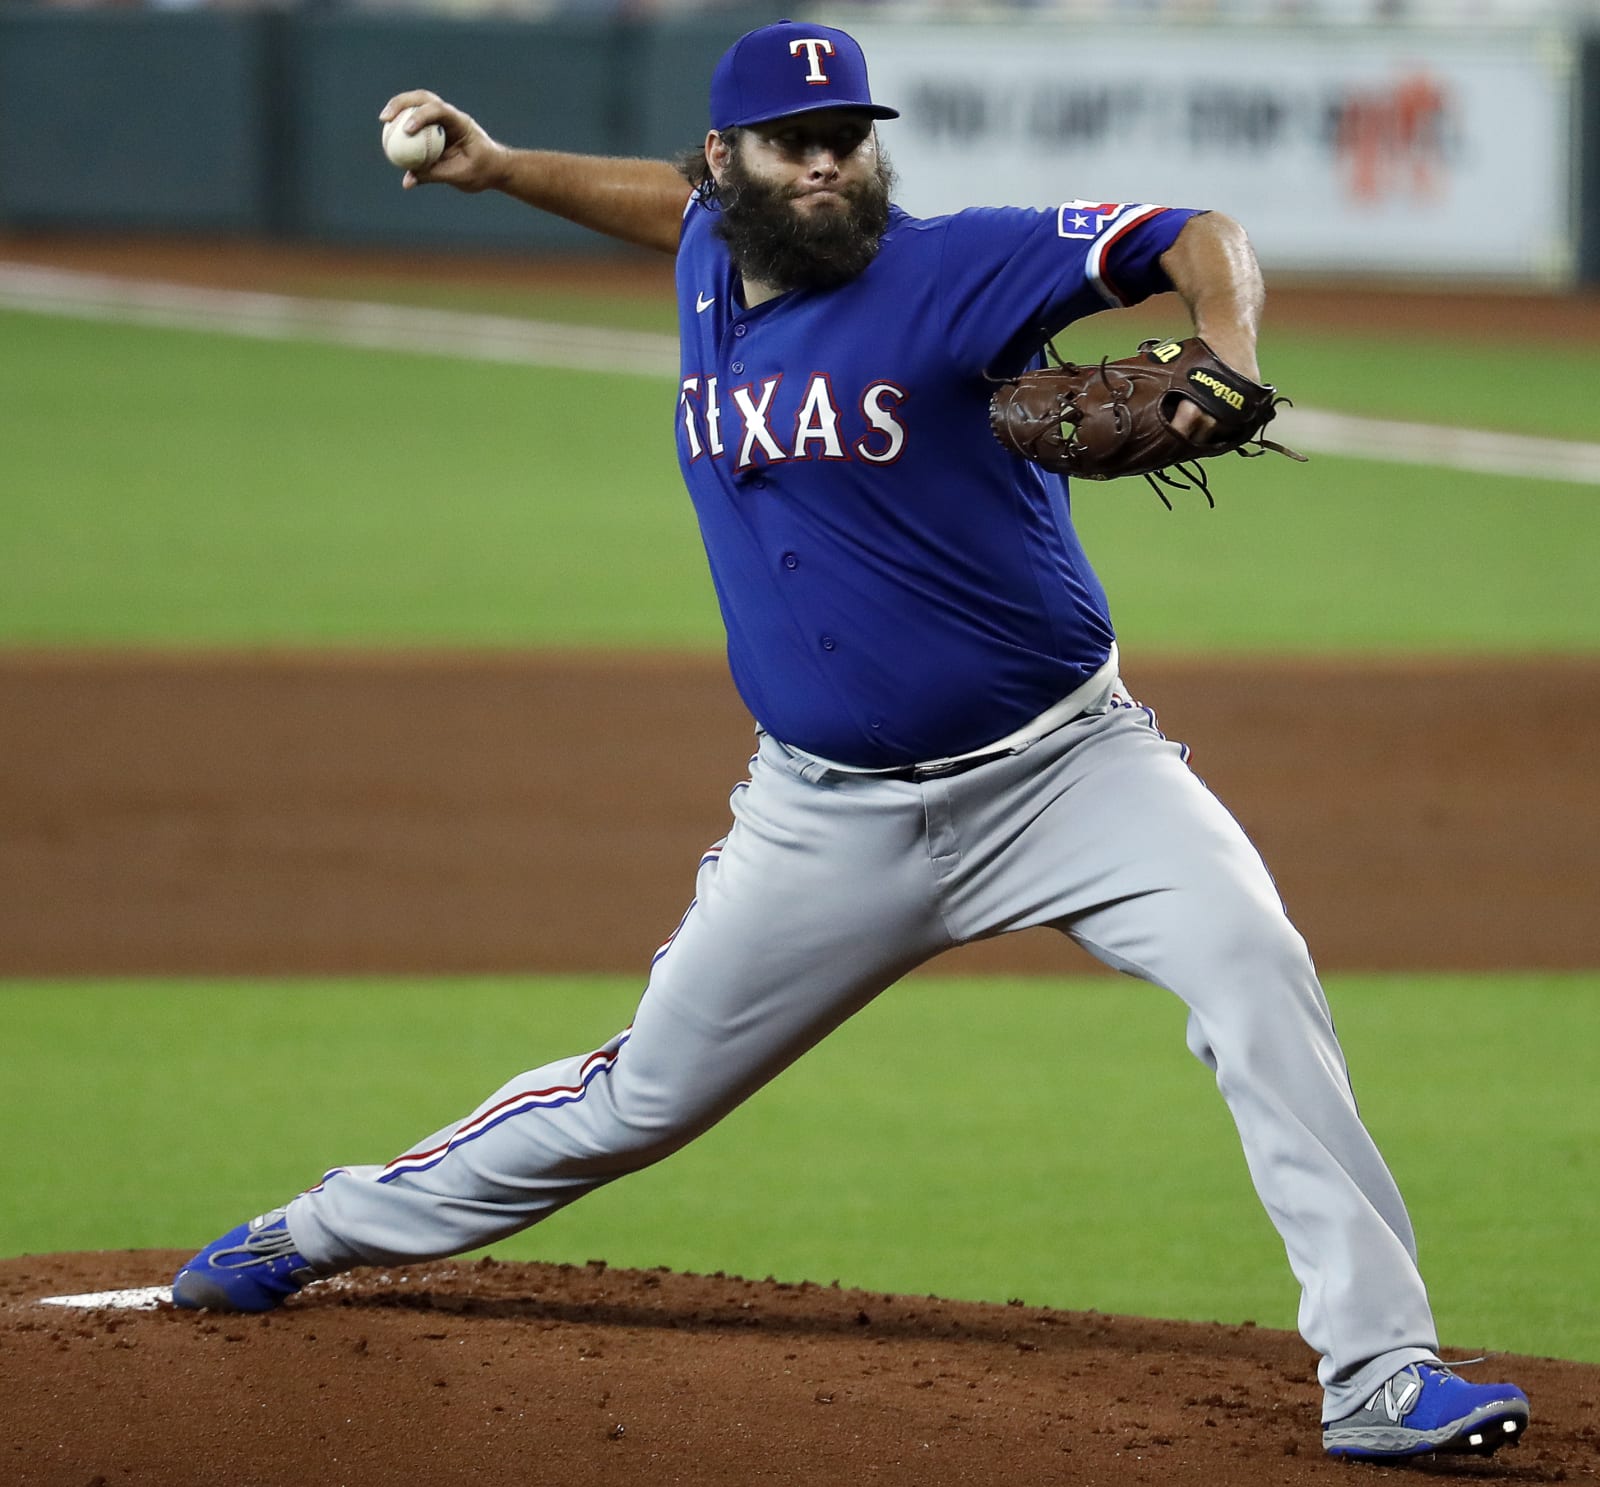 Texas Rangers Alltime Top10 free agent signings Page 2